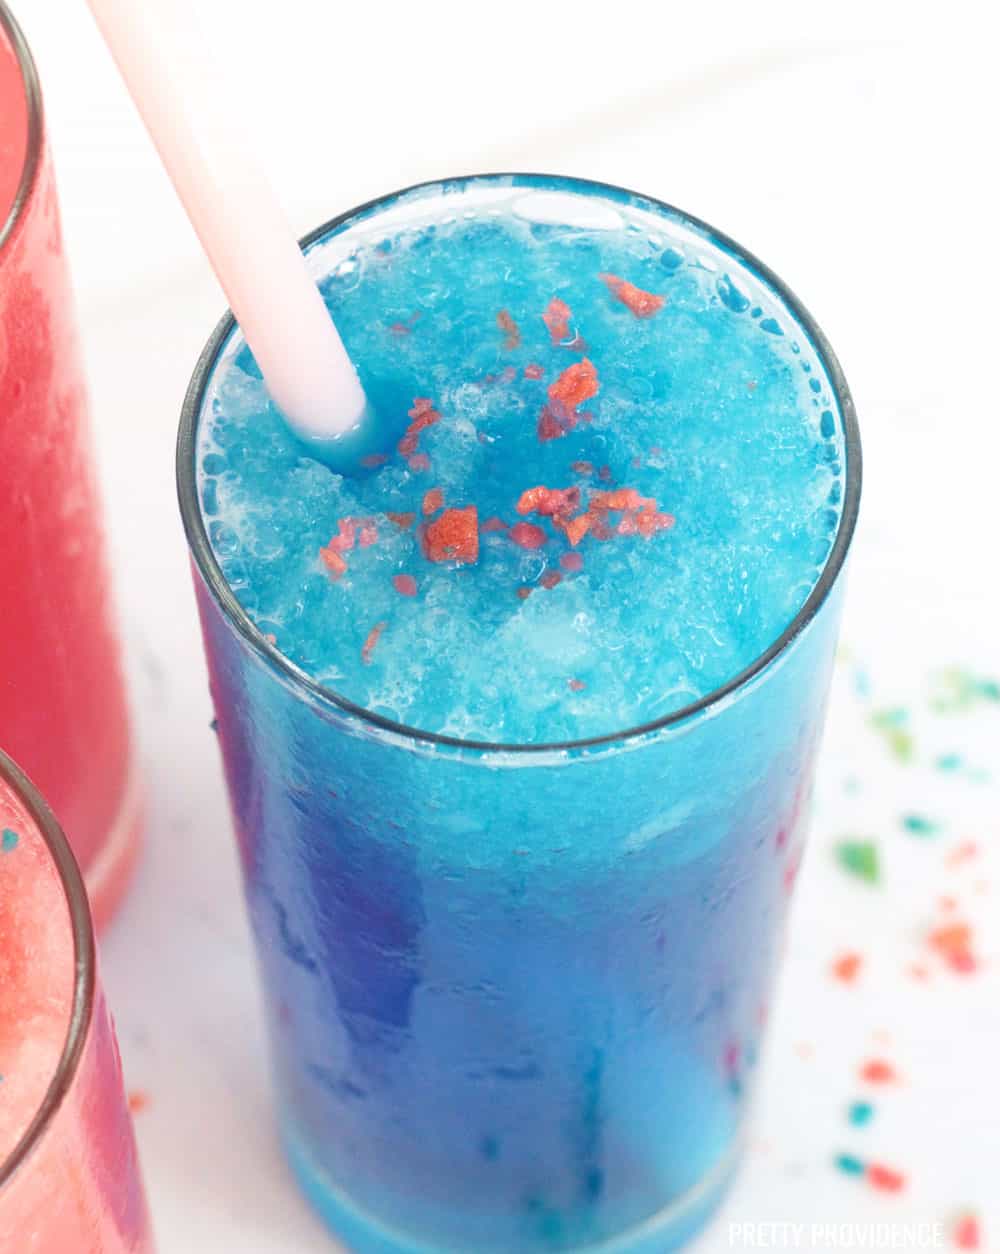 Blue sonic slush with pop rocks on top in a tall glass with a pink straw.